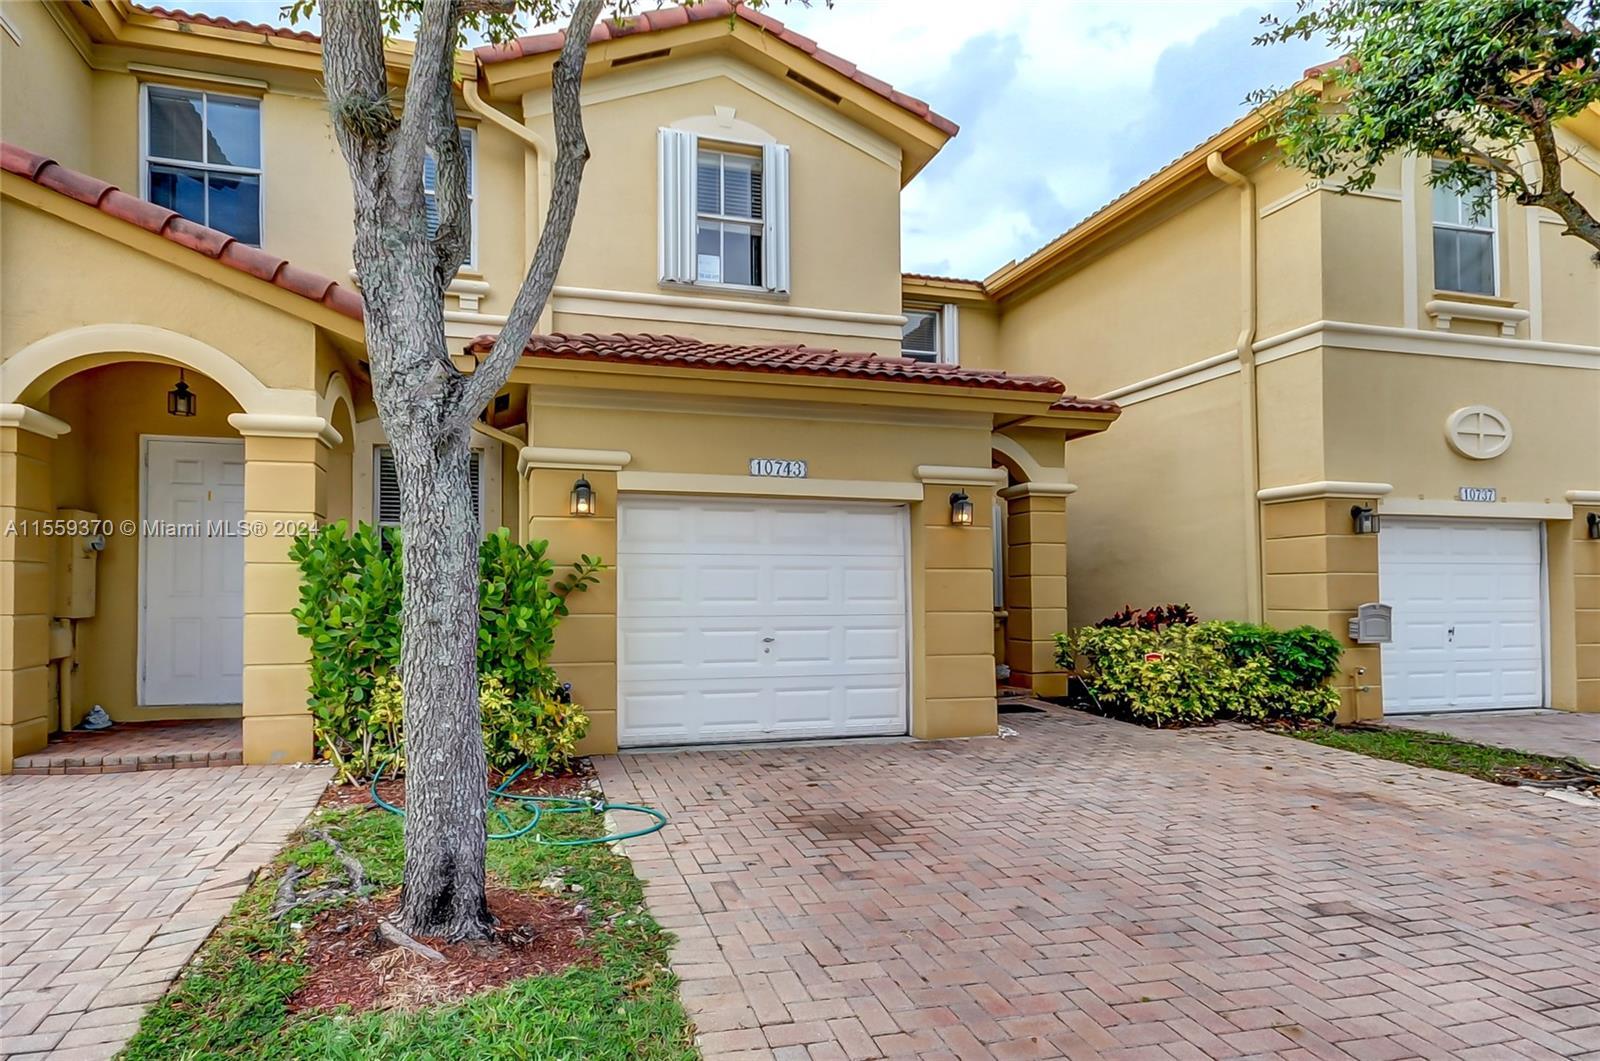 Photo of 10743 NW 78th Ter in Doral, FL